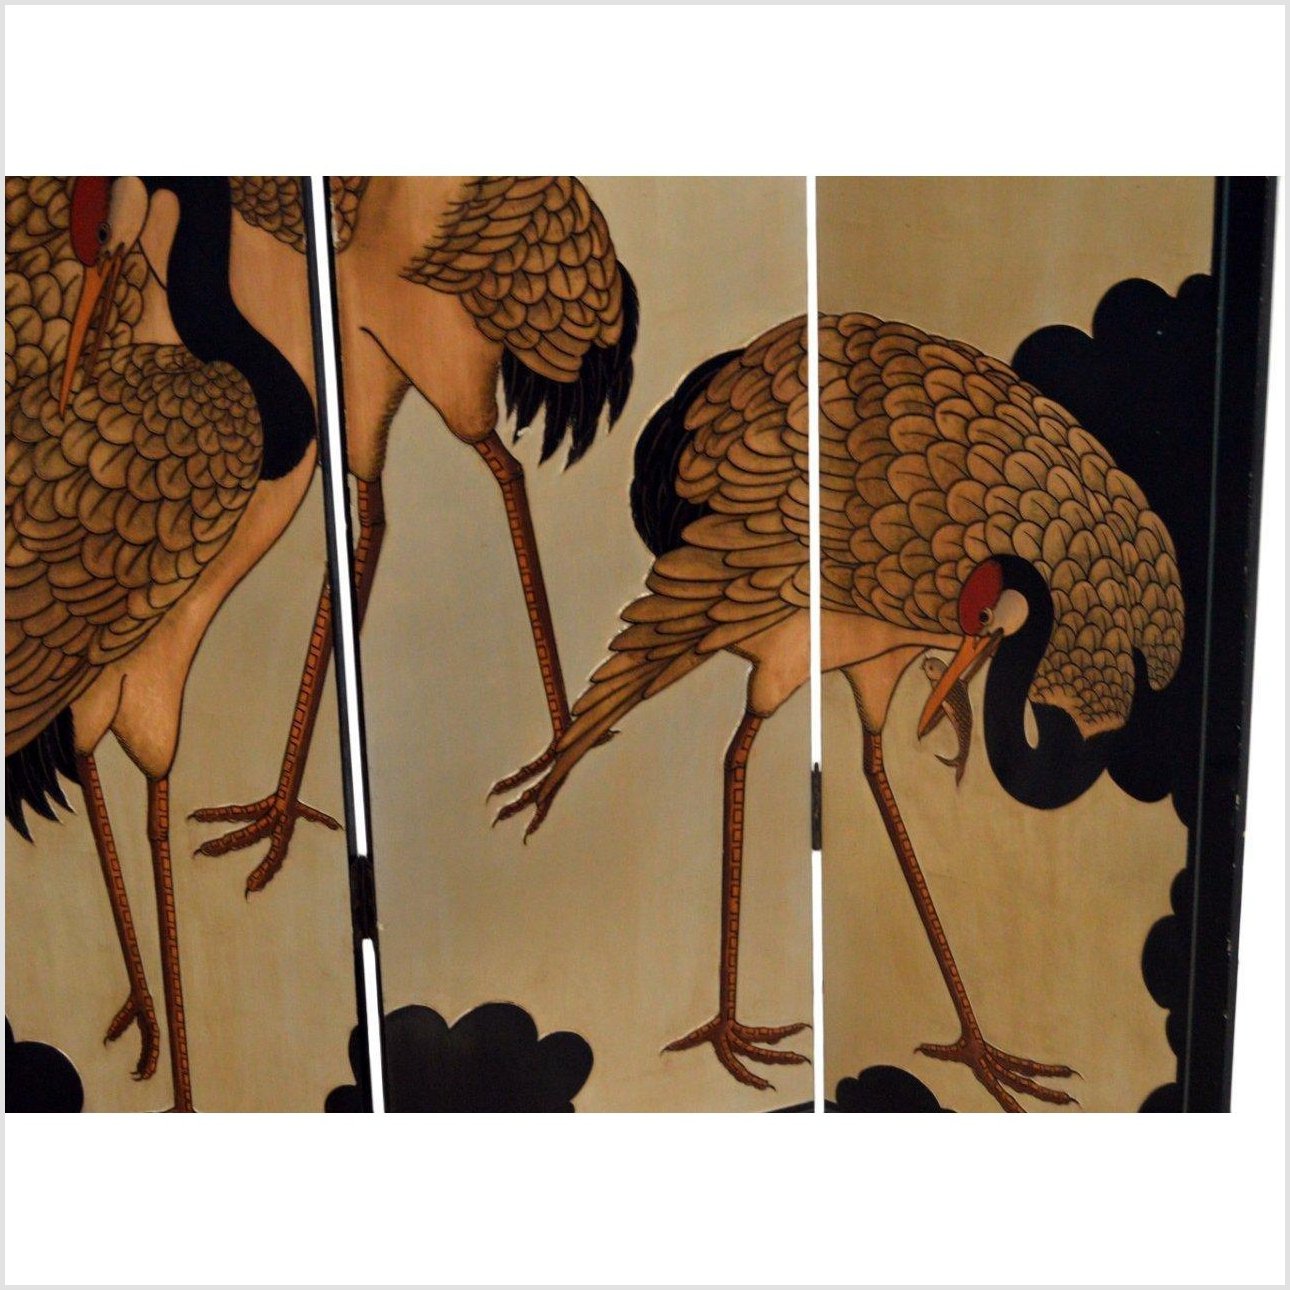 4-Panel Screen Depicting Flock of Cranes-YN2886-6. Asian & Chinese Furniture, Art, Antiques, Vintage Home Décor for sale at FEA Home